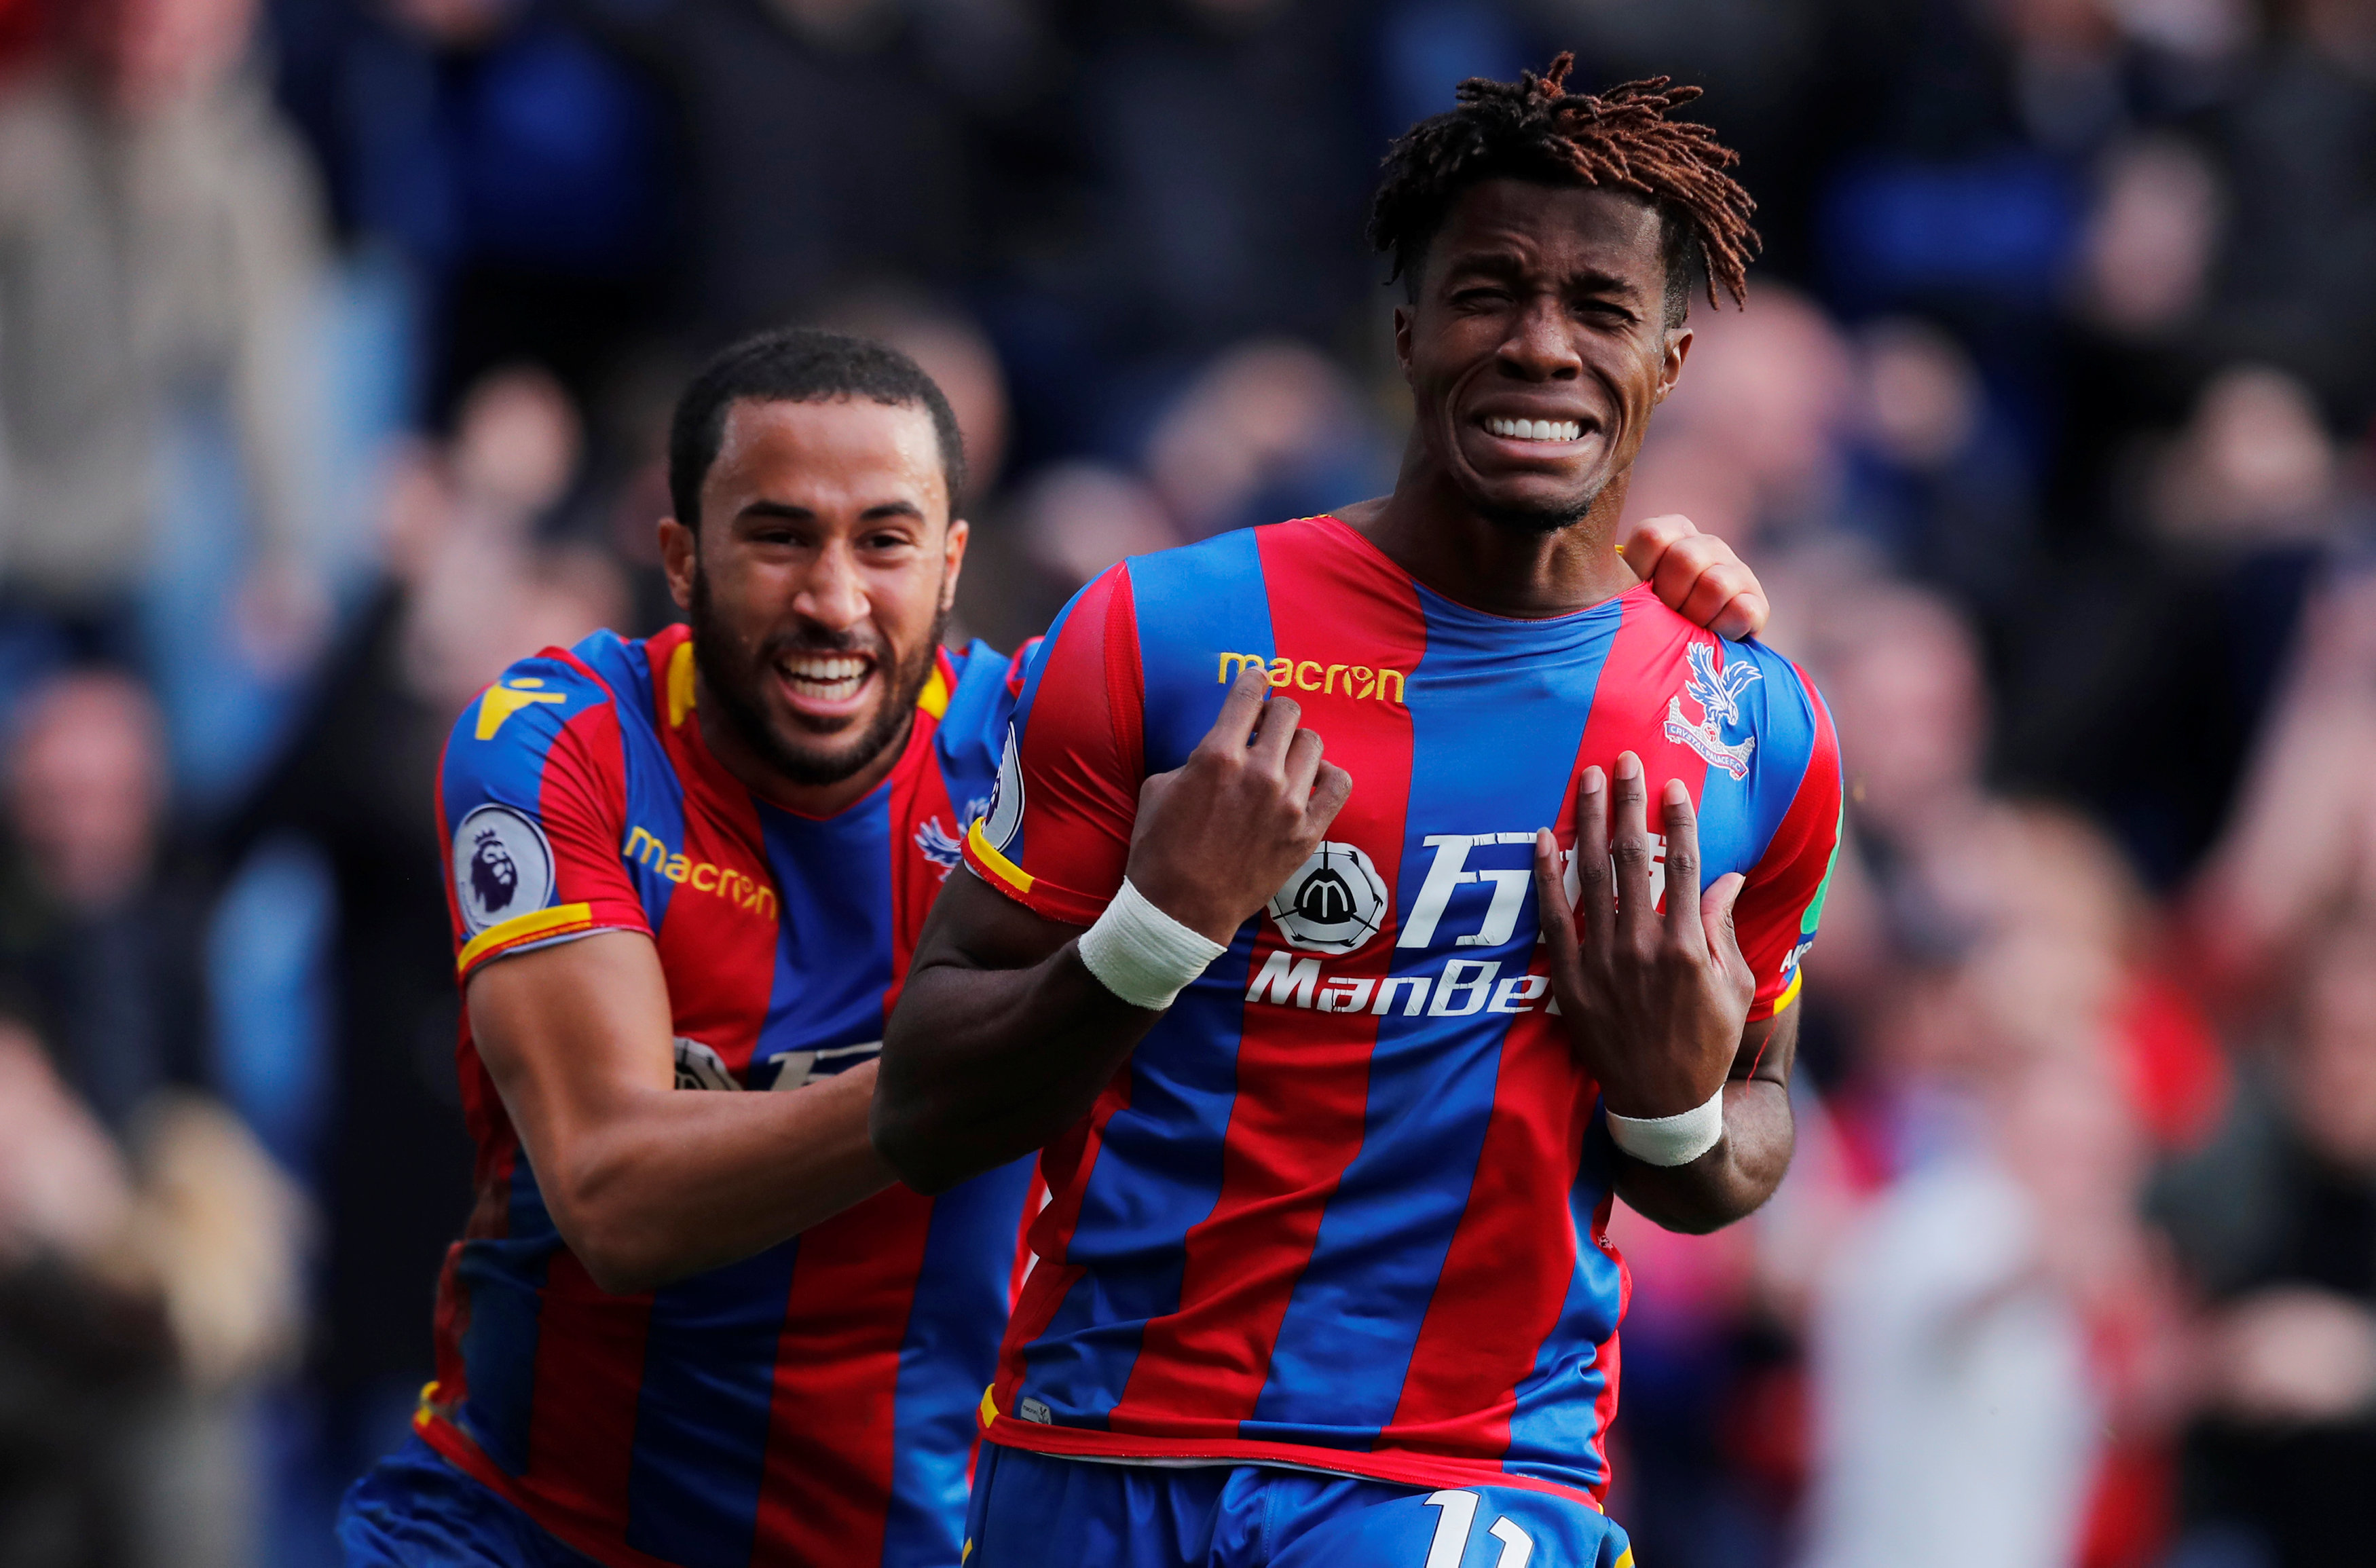 Football: Zaha's last-gasp equaliser salvages draw for Palace against West Ham